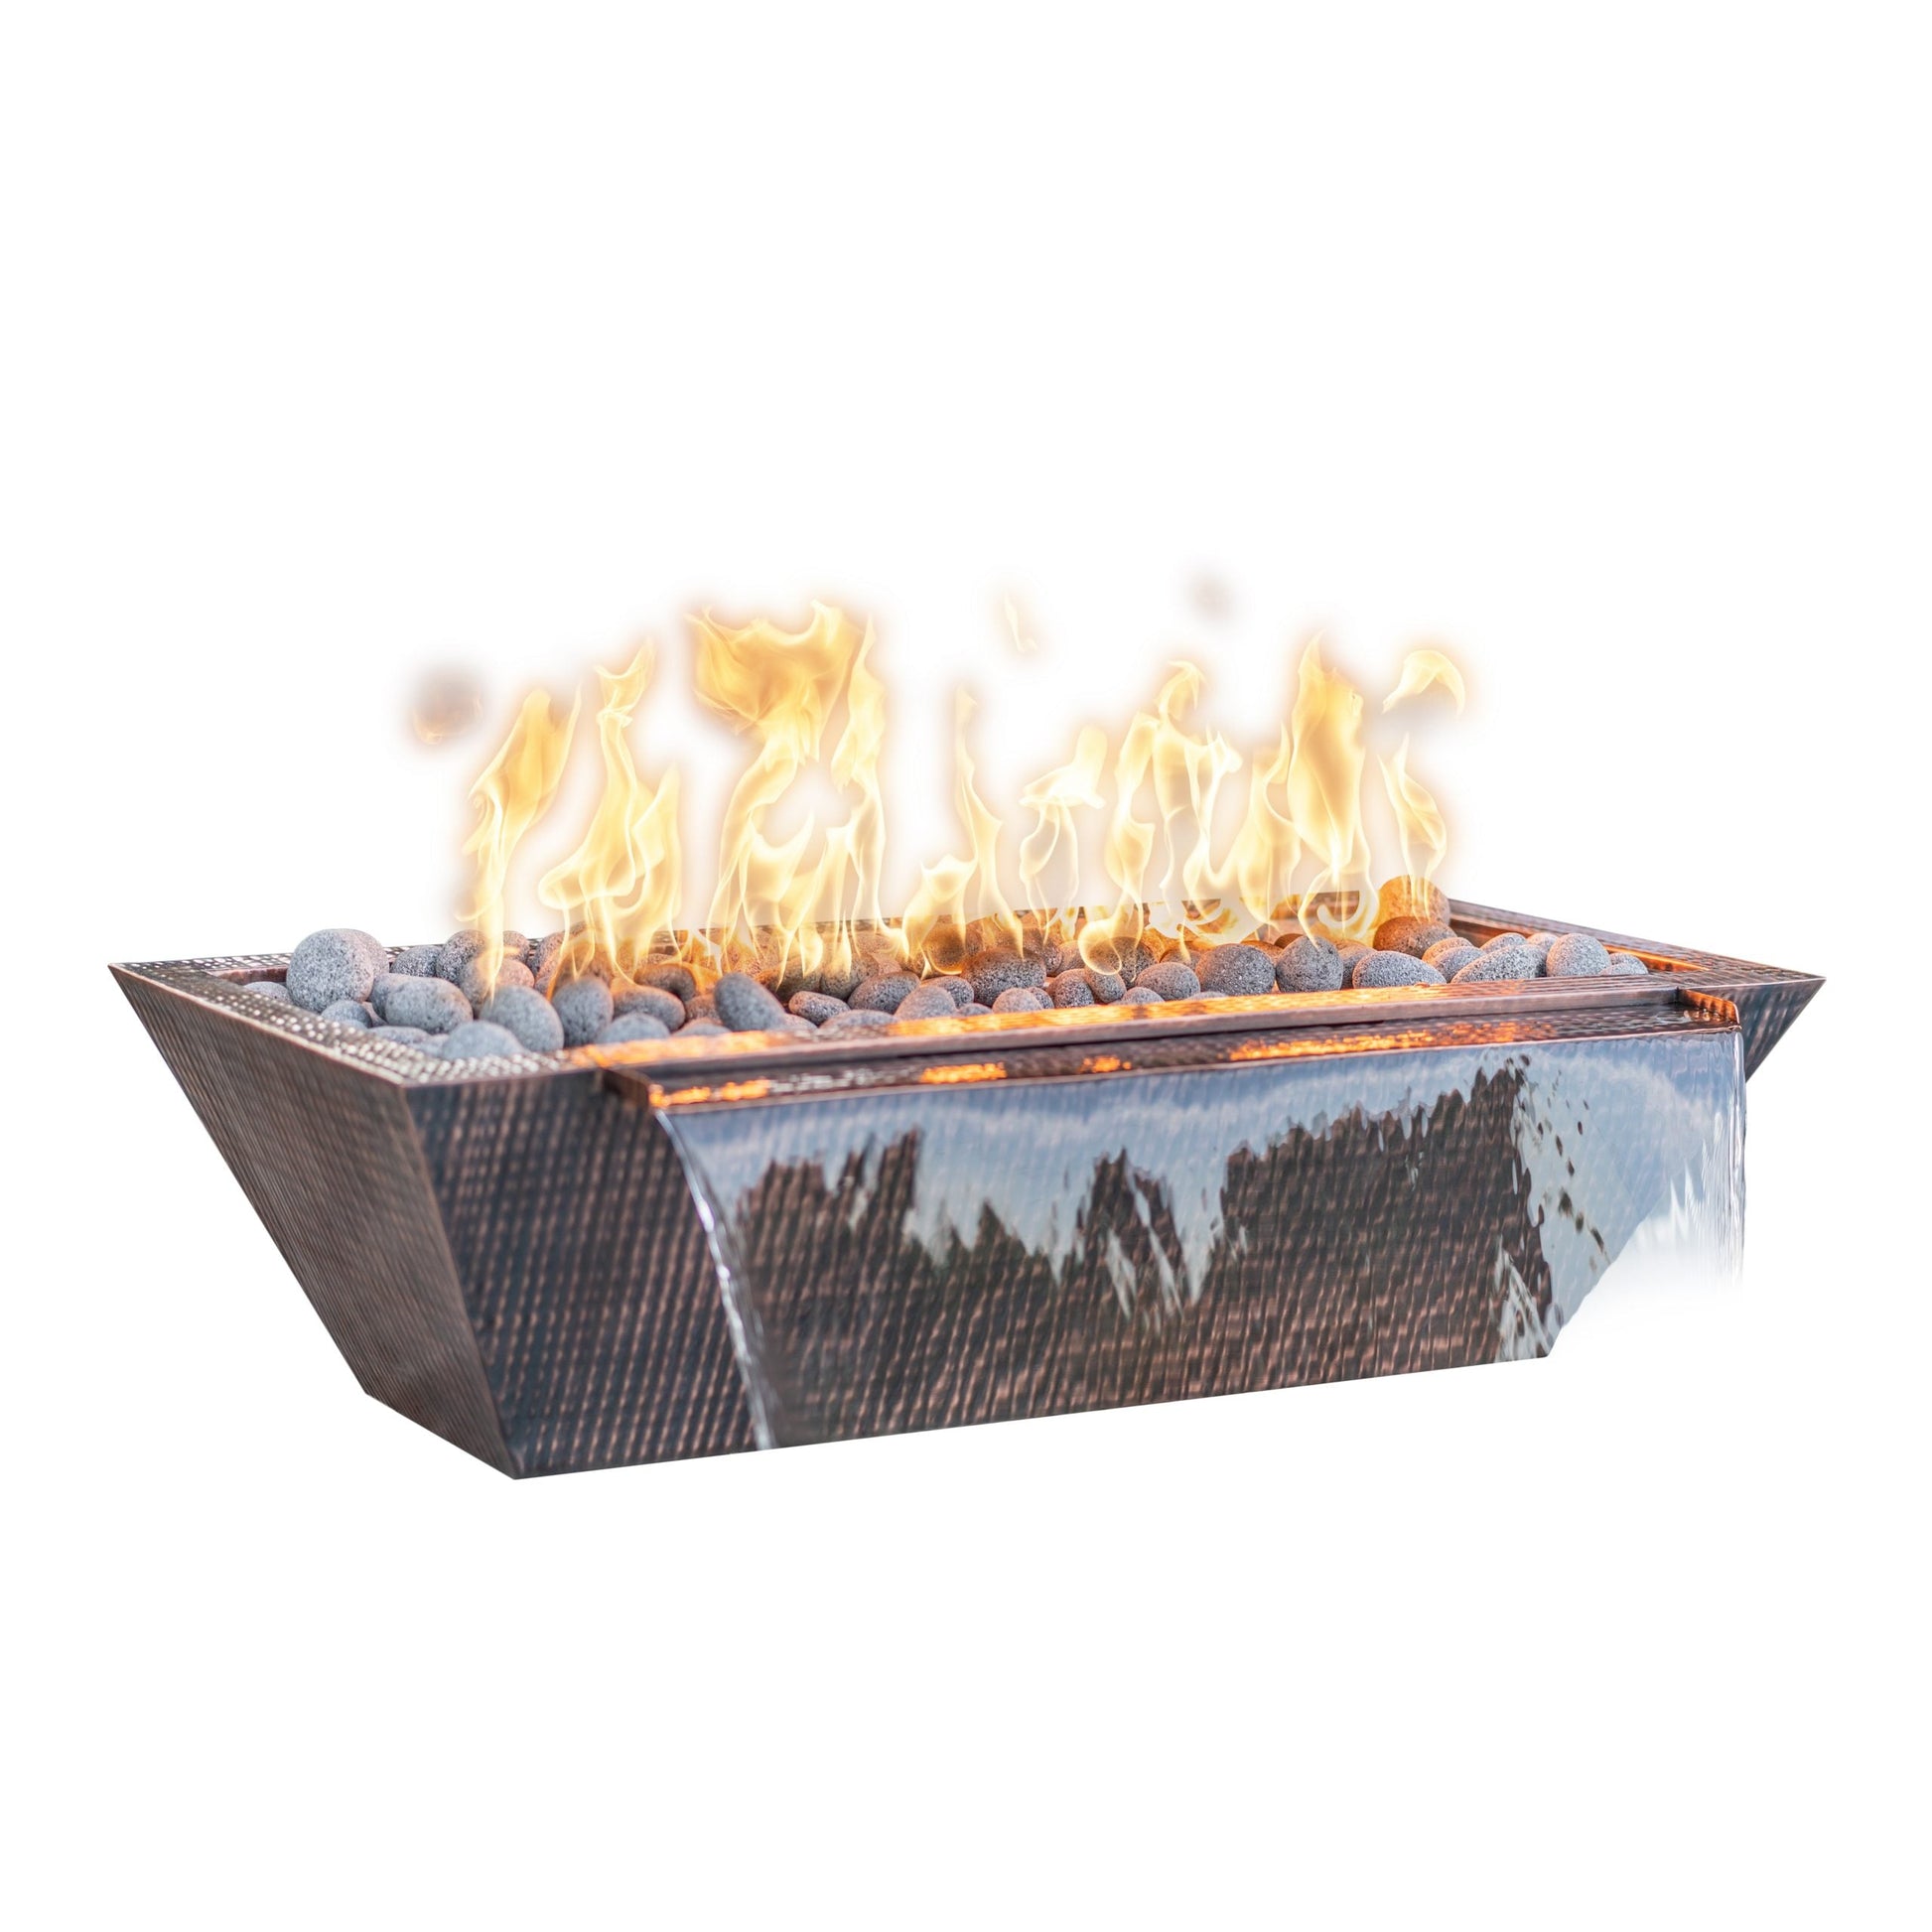 The Outdoor Plus Linear Maya 60" Hammered Copper Natural Gas Fire & Water Bowl with Match Lit with Flame Sense Ignition